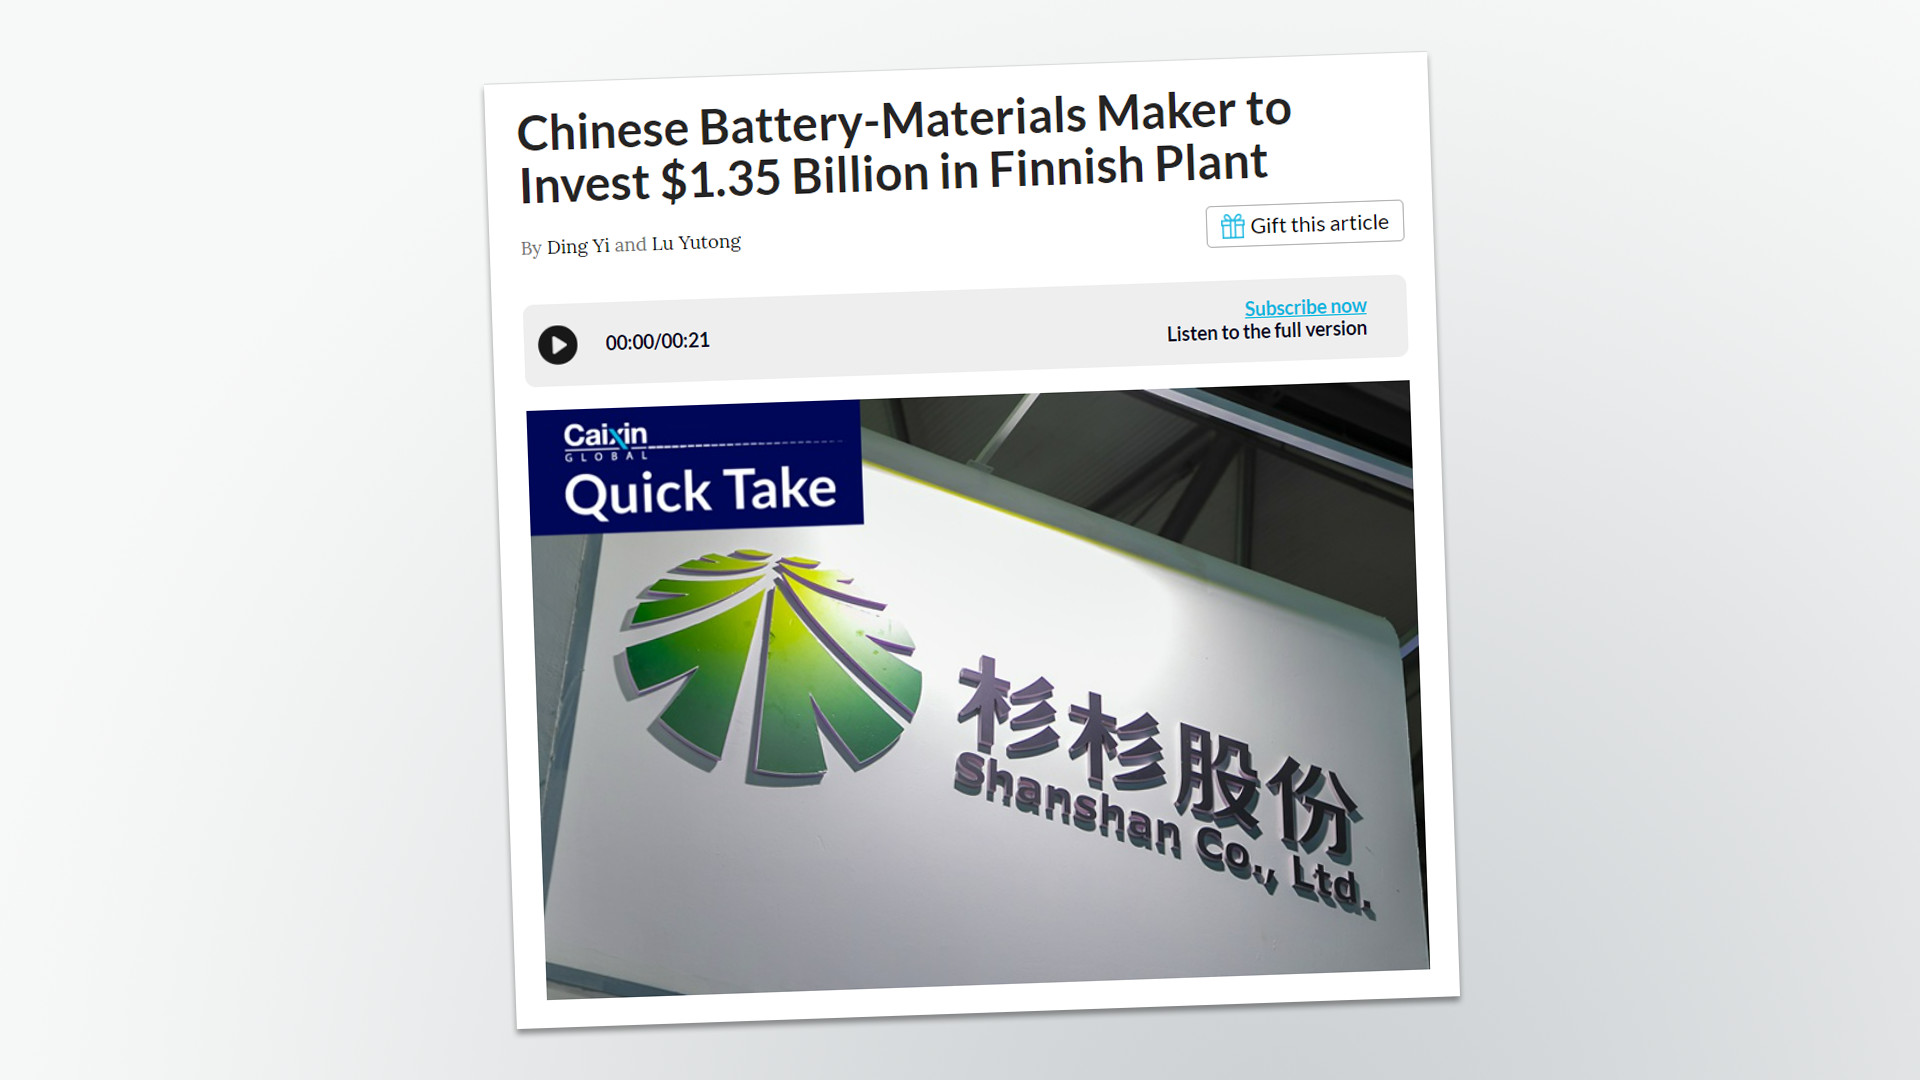 A Chinese company is building a 1.3 billion euro battery material factory in Finland